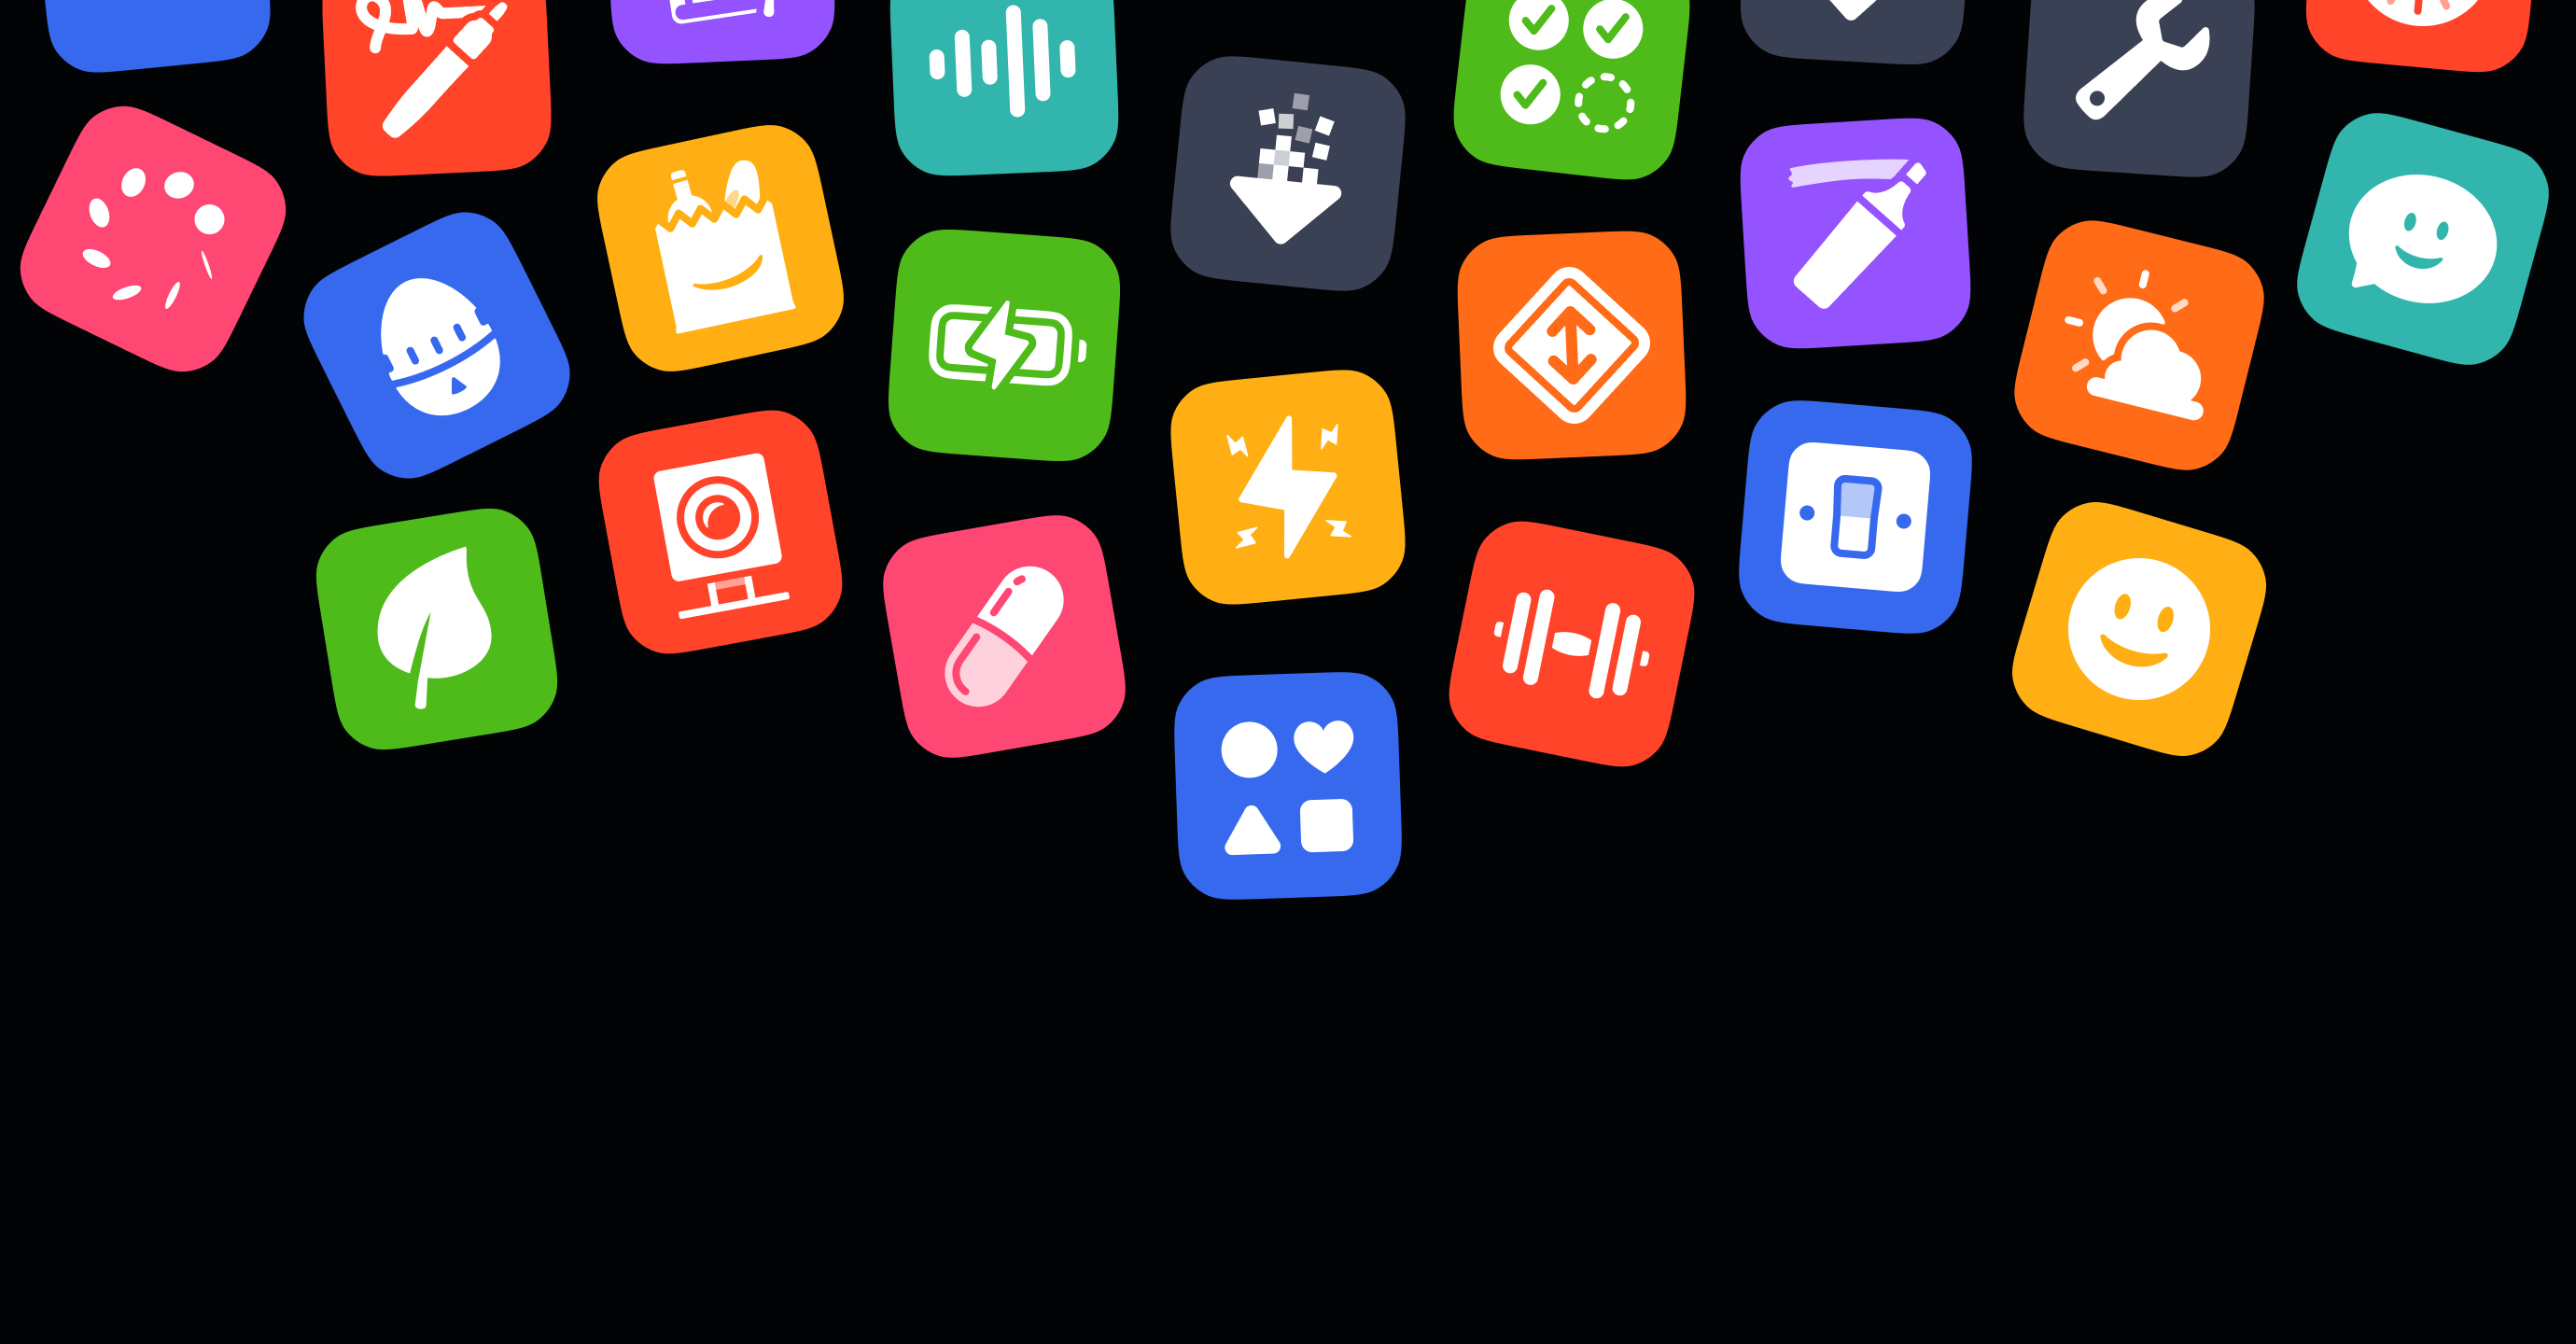 A header image showing various icons from the Extended for Shortcuts set.